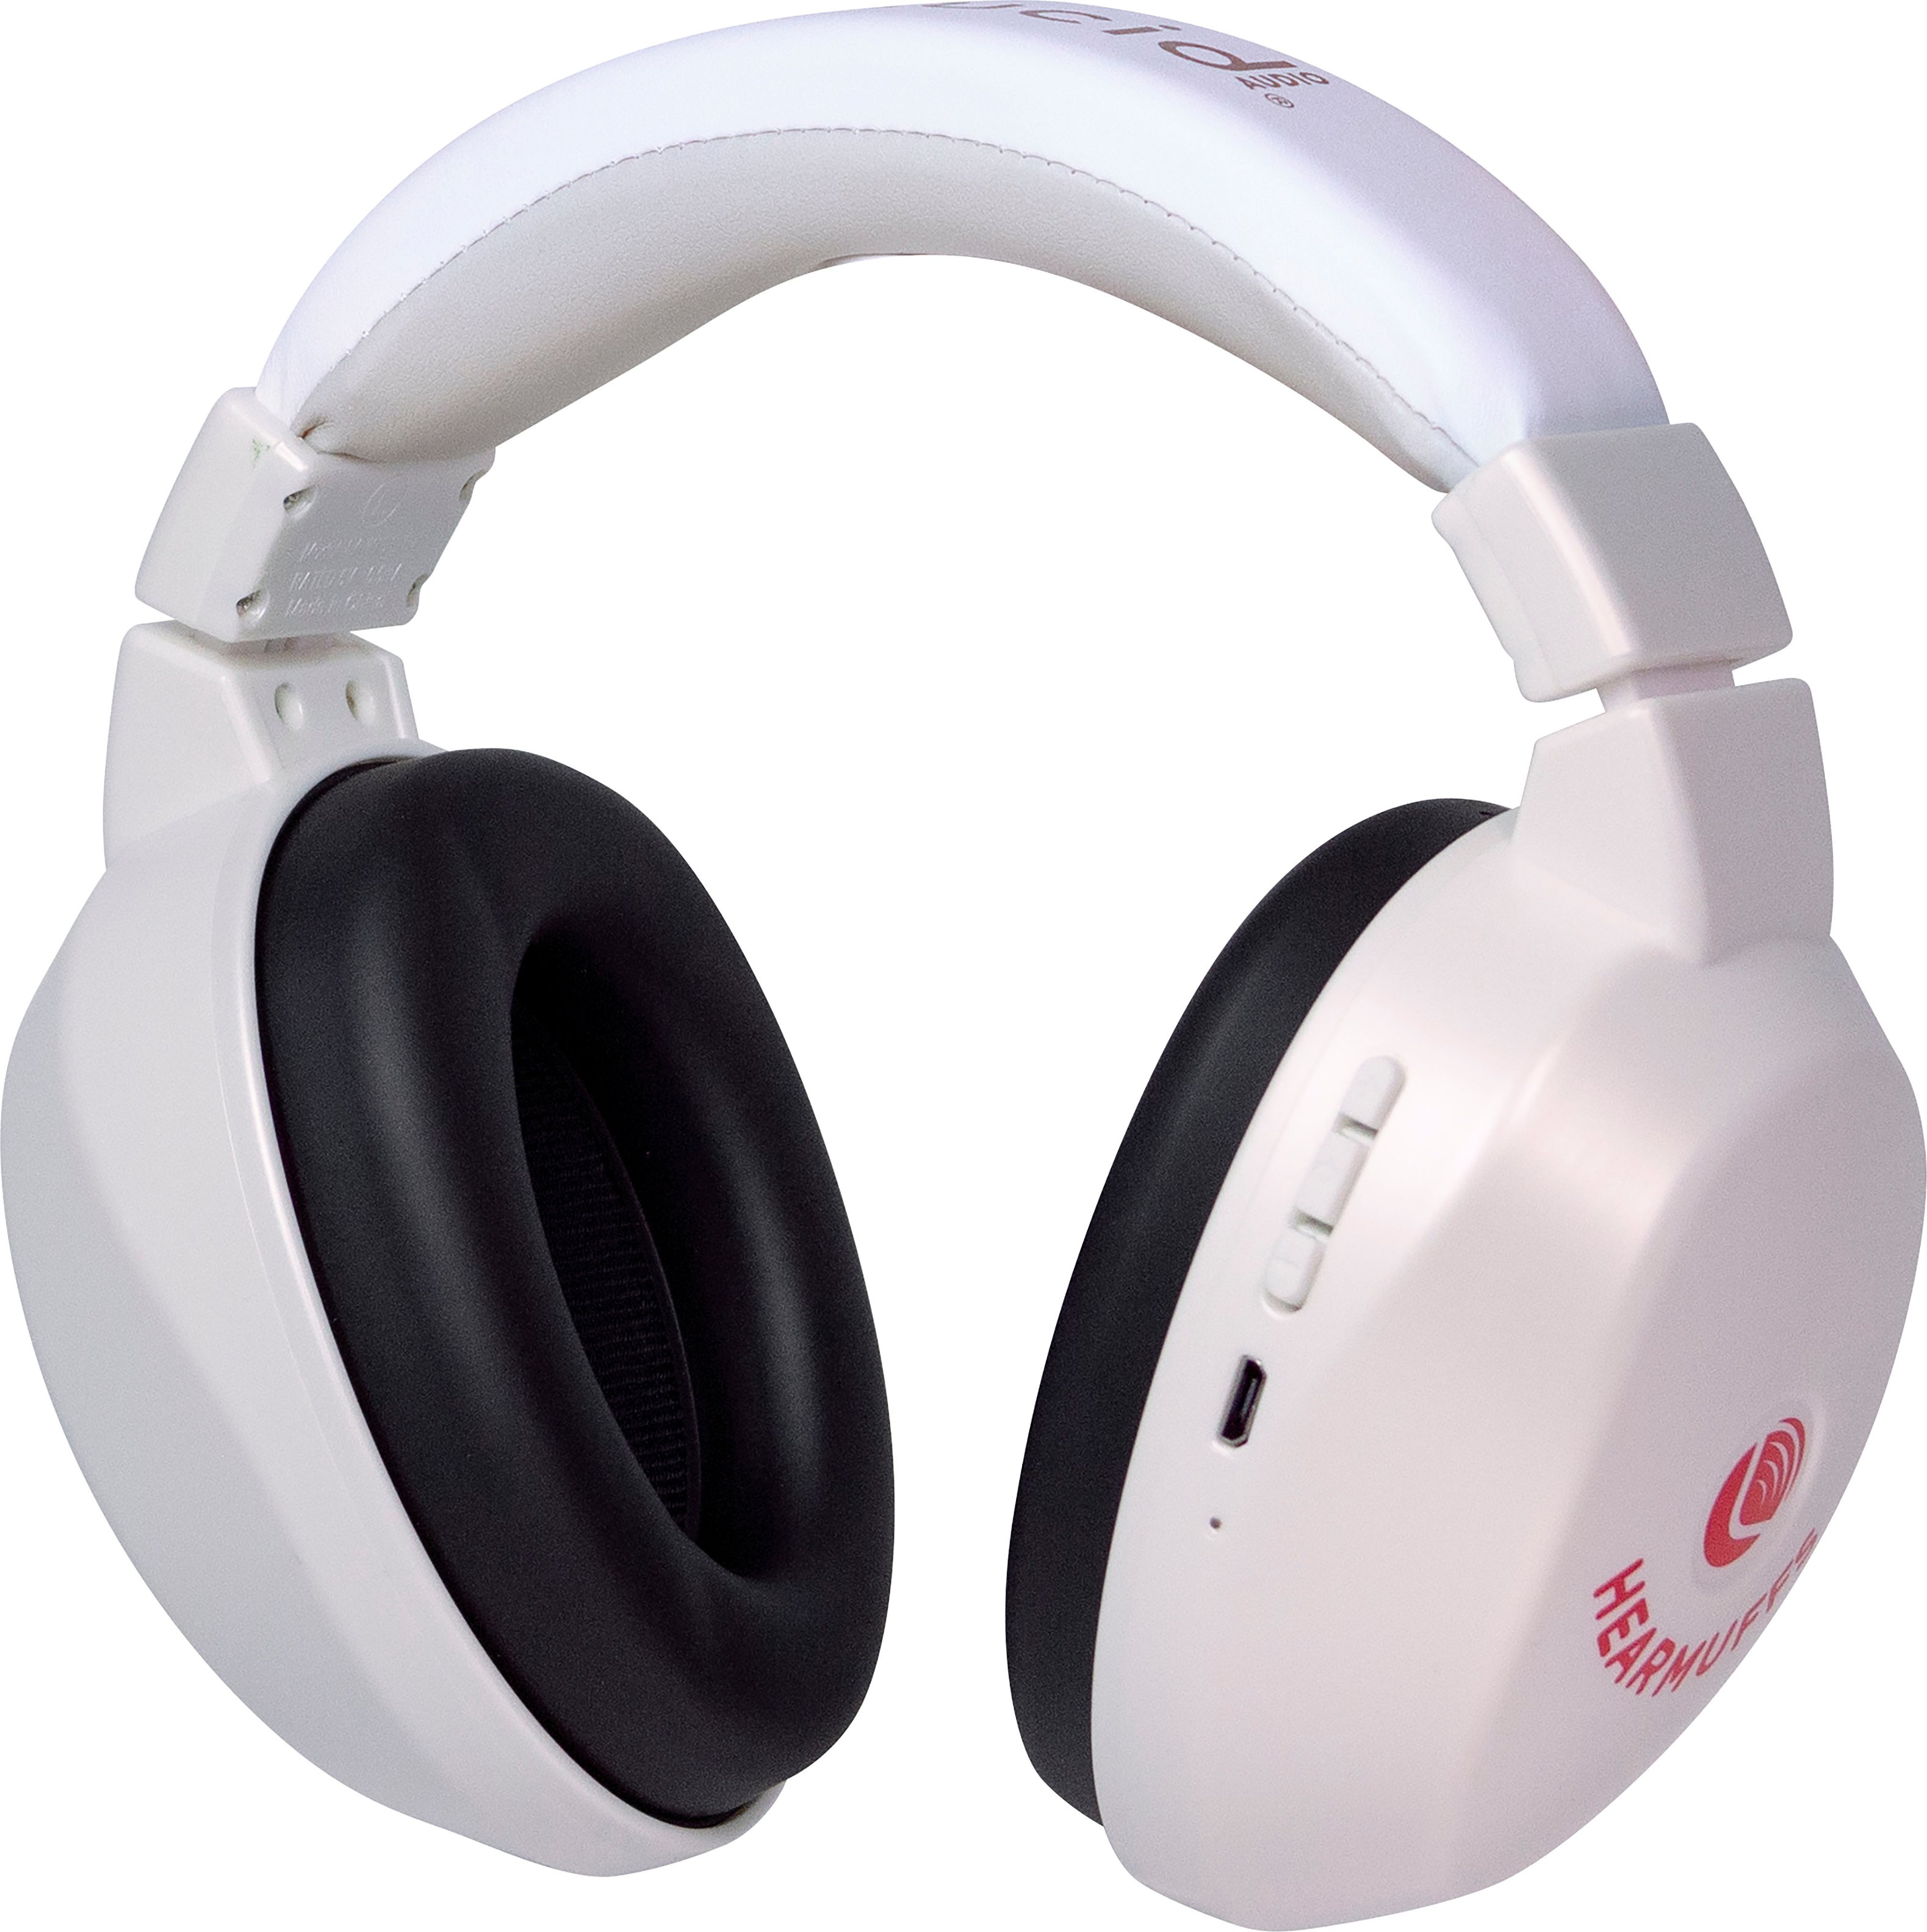 Left View: Lucid Hearing - Bluetooth HearMuffs for Children - Hearing Protection Ear Muffs Ideal for Kids 5-10 Years Old - WHITE